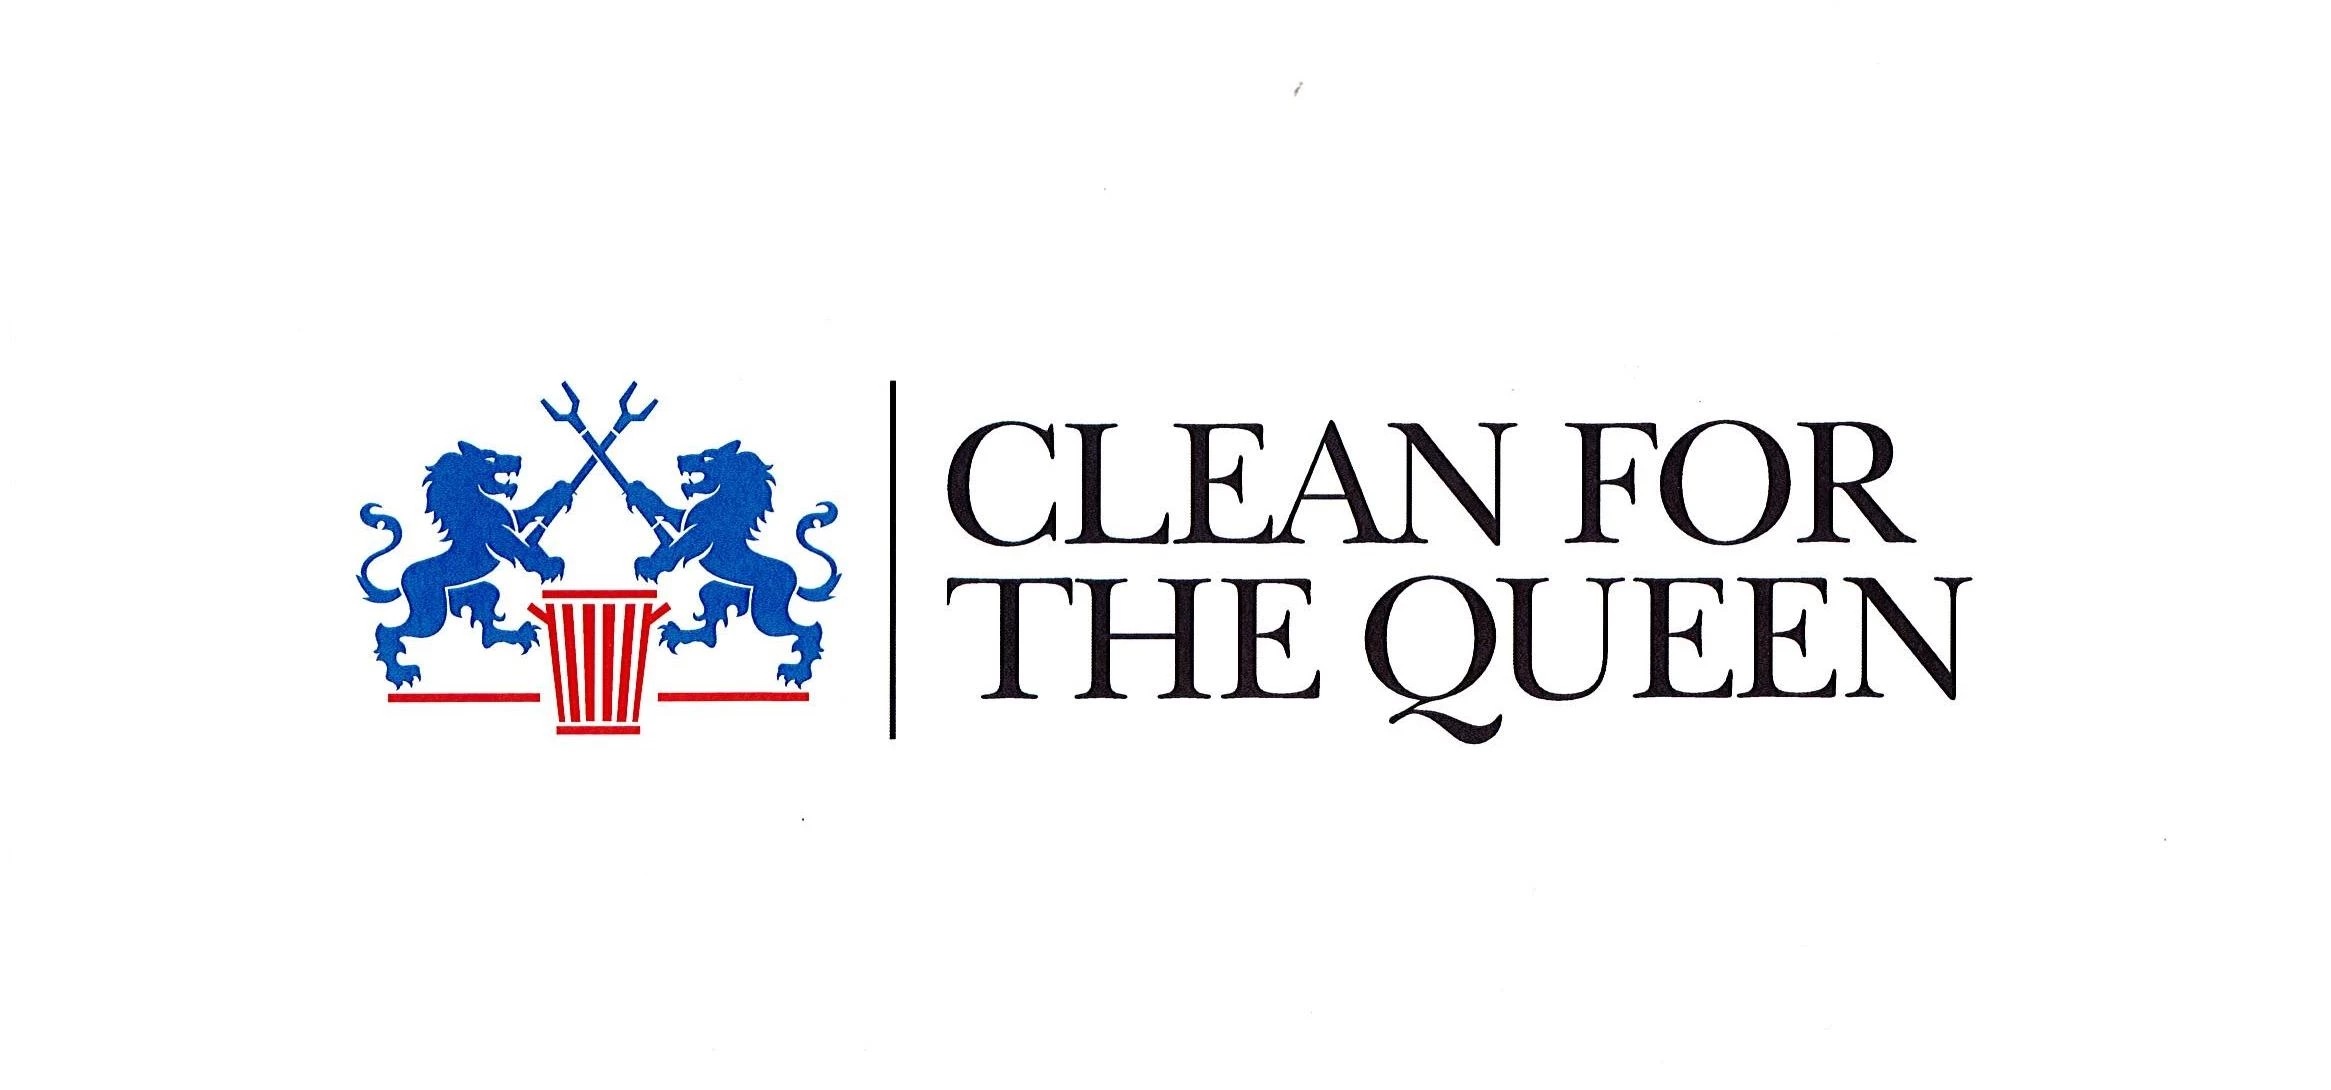 Sunderland retailers will join the national Clean for the Queen campaign